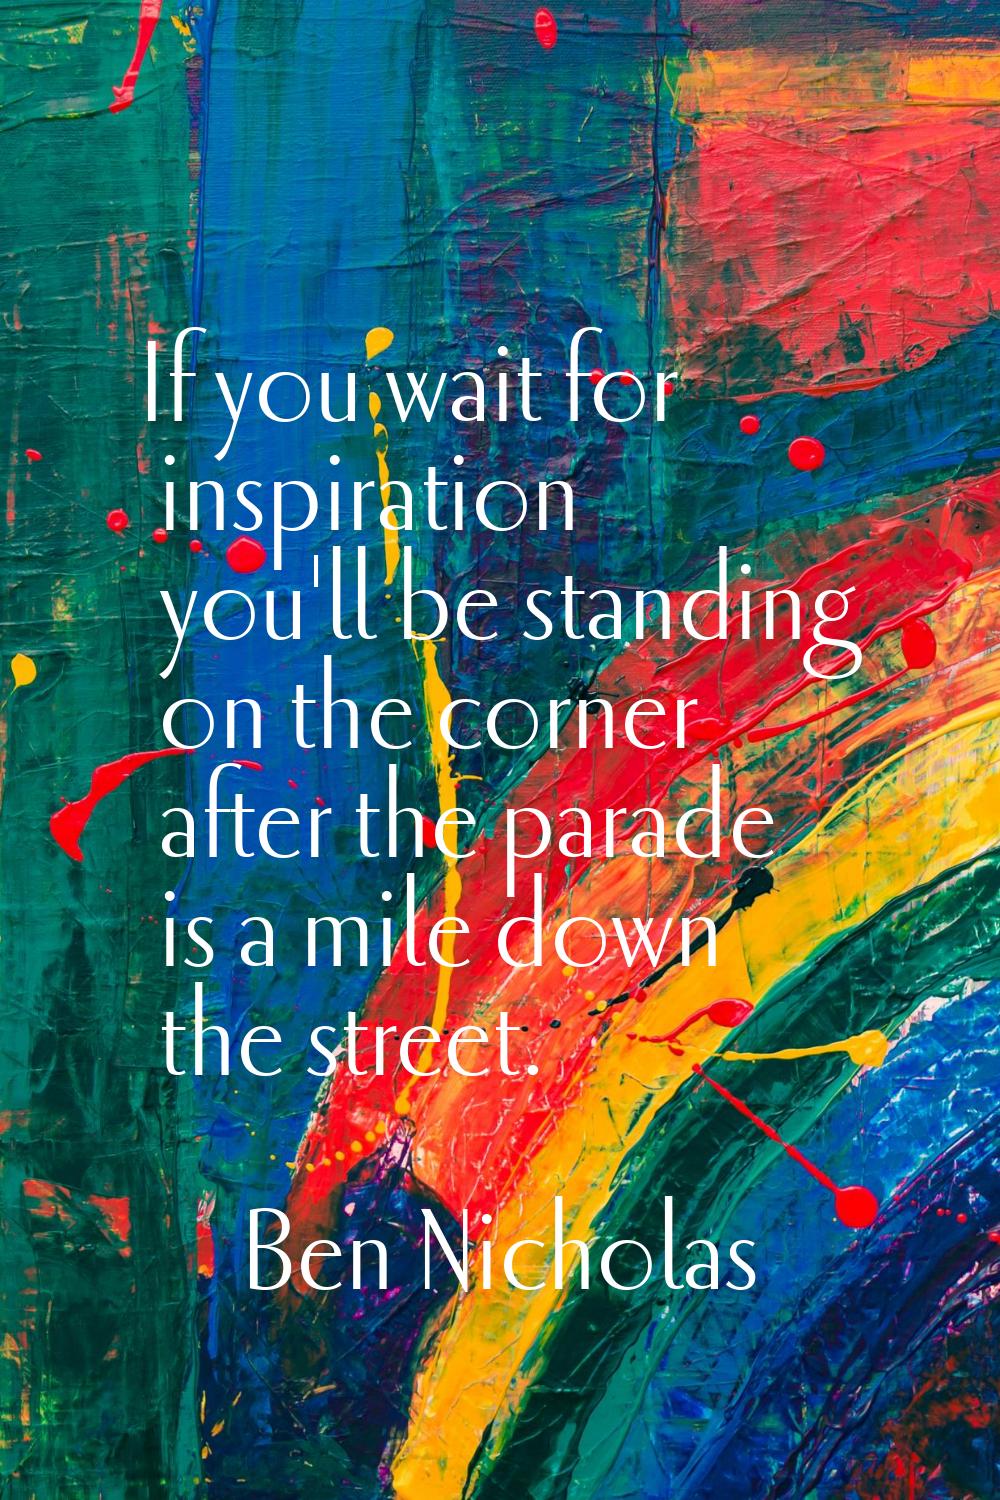 If you wait for inspiration you'll be standing on the corner after the parade is a mile down the st